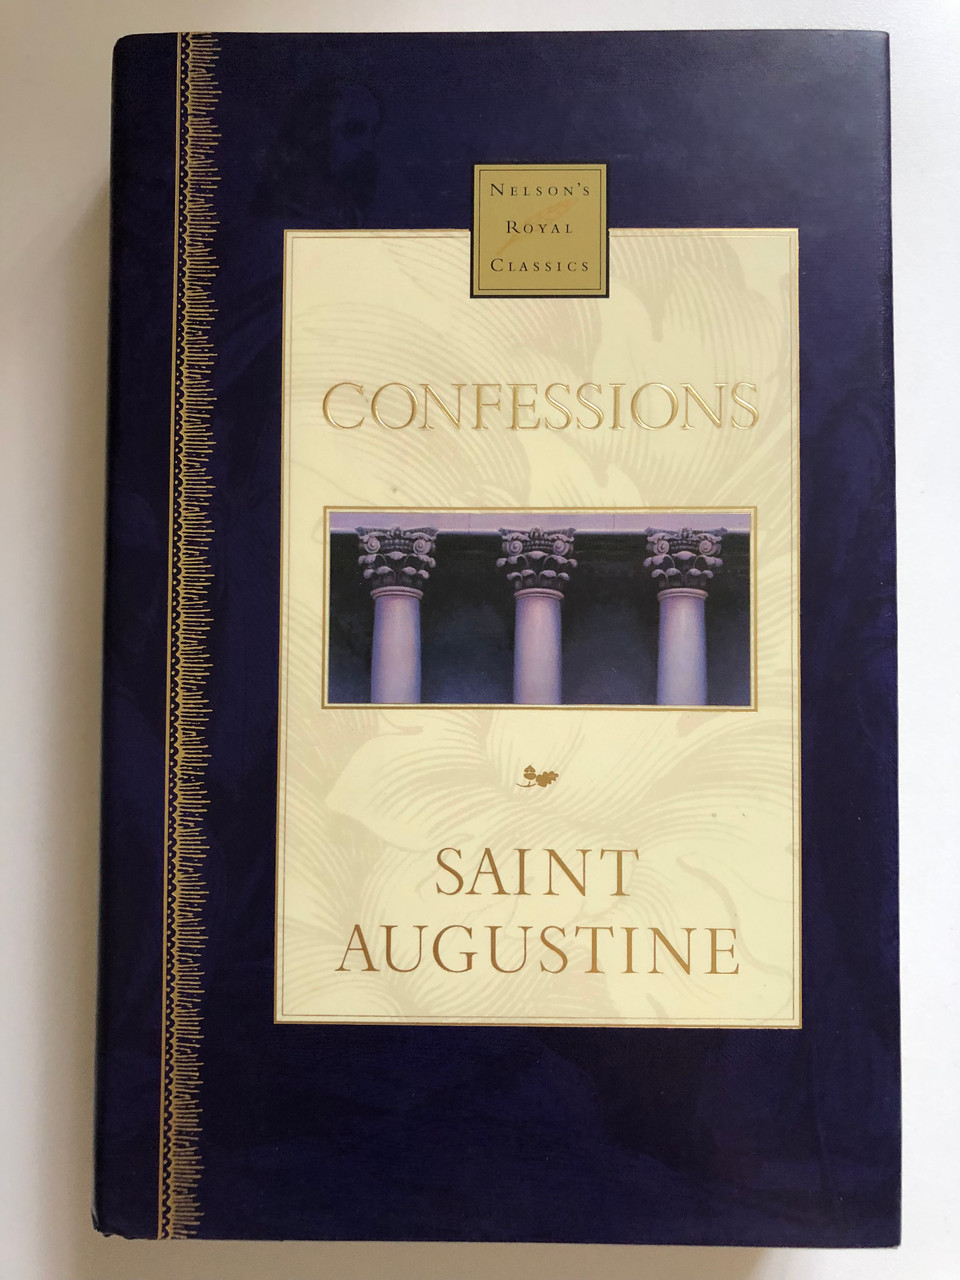 Confessions_Nelsons_Royal_Classics_by_Bishop_of_Hippo_Augustine_Saint_The_premier_line_of_Classic_literature_from_the_greatest_Christian_authors_Publisher_Thomas_Ne_1__94515.1691322168.1280.1280.JPG (960×1280)